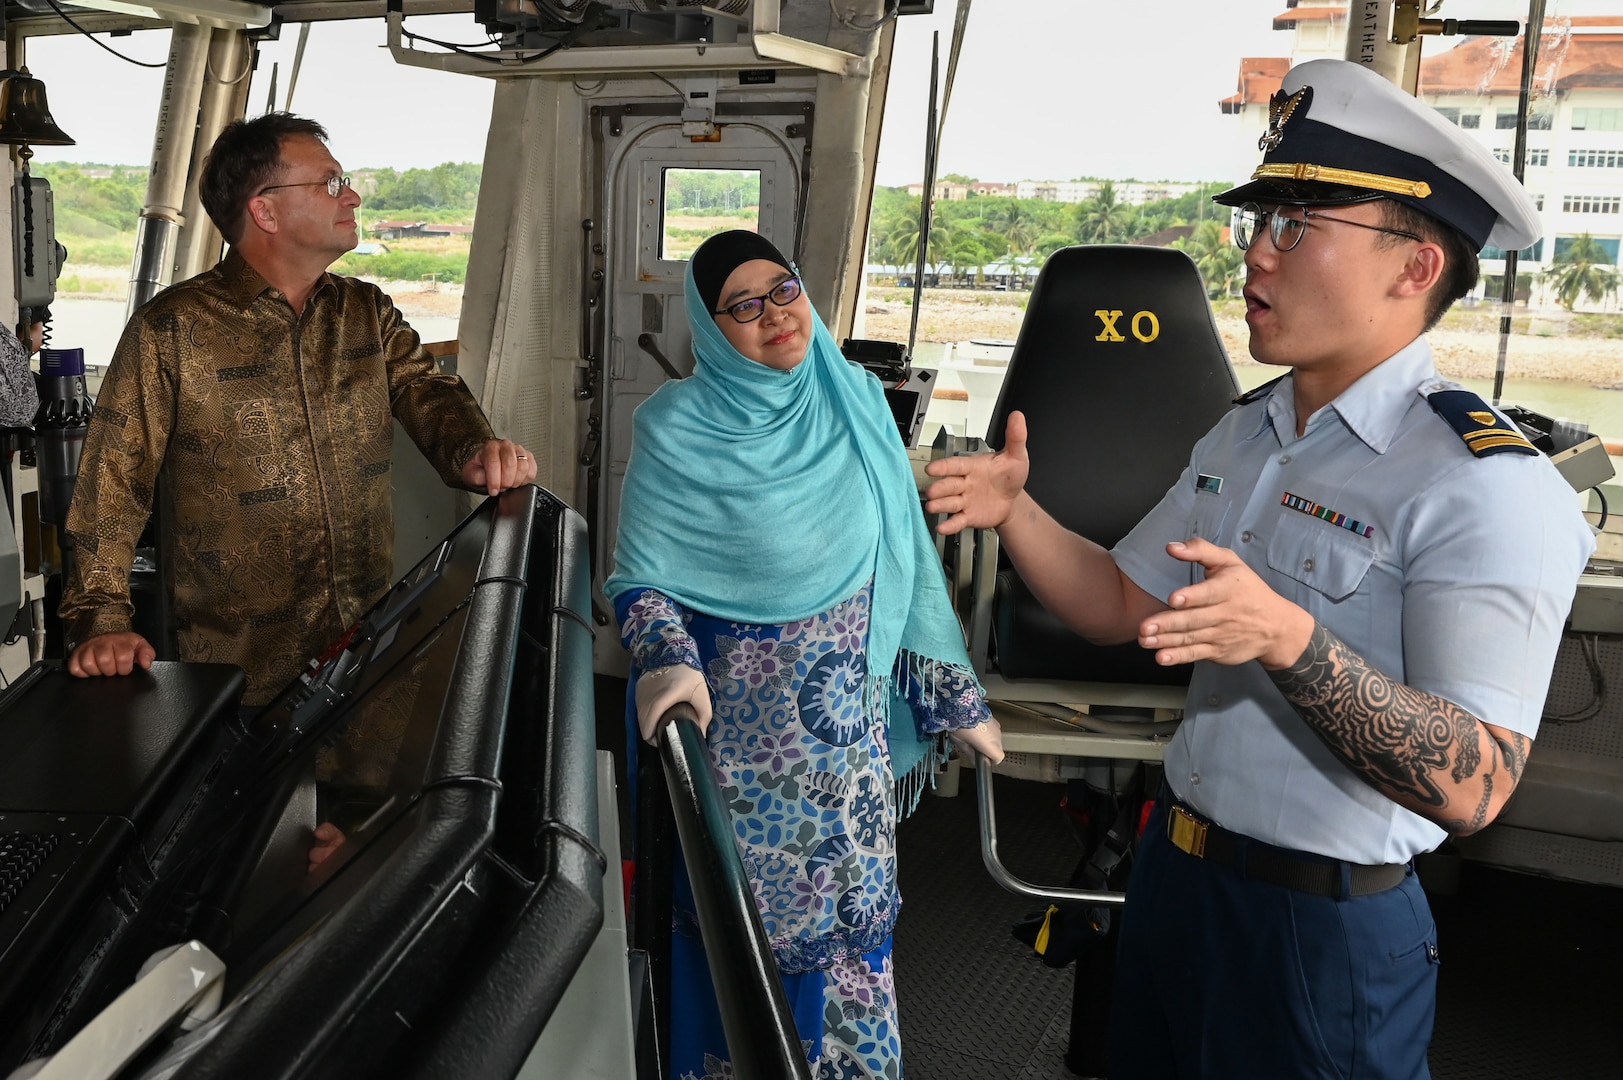 Lt. j.g. Mathew Cho speaks to YBhg. Dato’ Anis Rizana Binti Mohd Zainudin, Director General of Royal Malaysian Customs, and Edgard D. Kagan, U.S. Ambassador-designate to Malaysia, during a tour aboard U.S. Coast Guard Cutter Bertholf (WMSL 750) while the cutter was moored in Port Klang, Malaysia, March 2, 2024. This was the first time a U.S. Coast Guard vessel has moored in Port Klang. (U.S. Coast Guard photo by Petty Officer Steve Strohmaier)